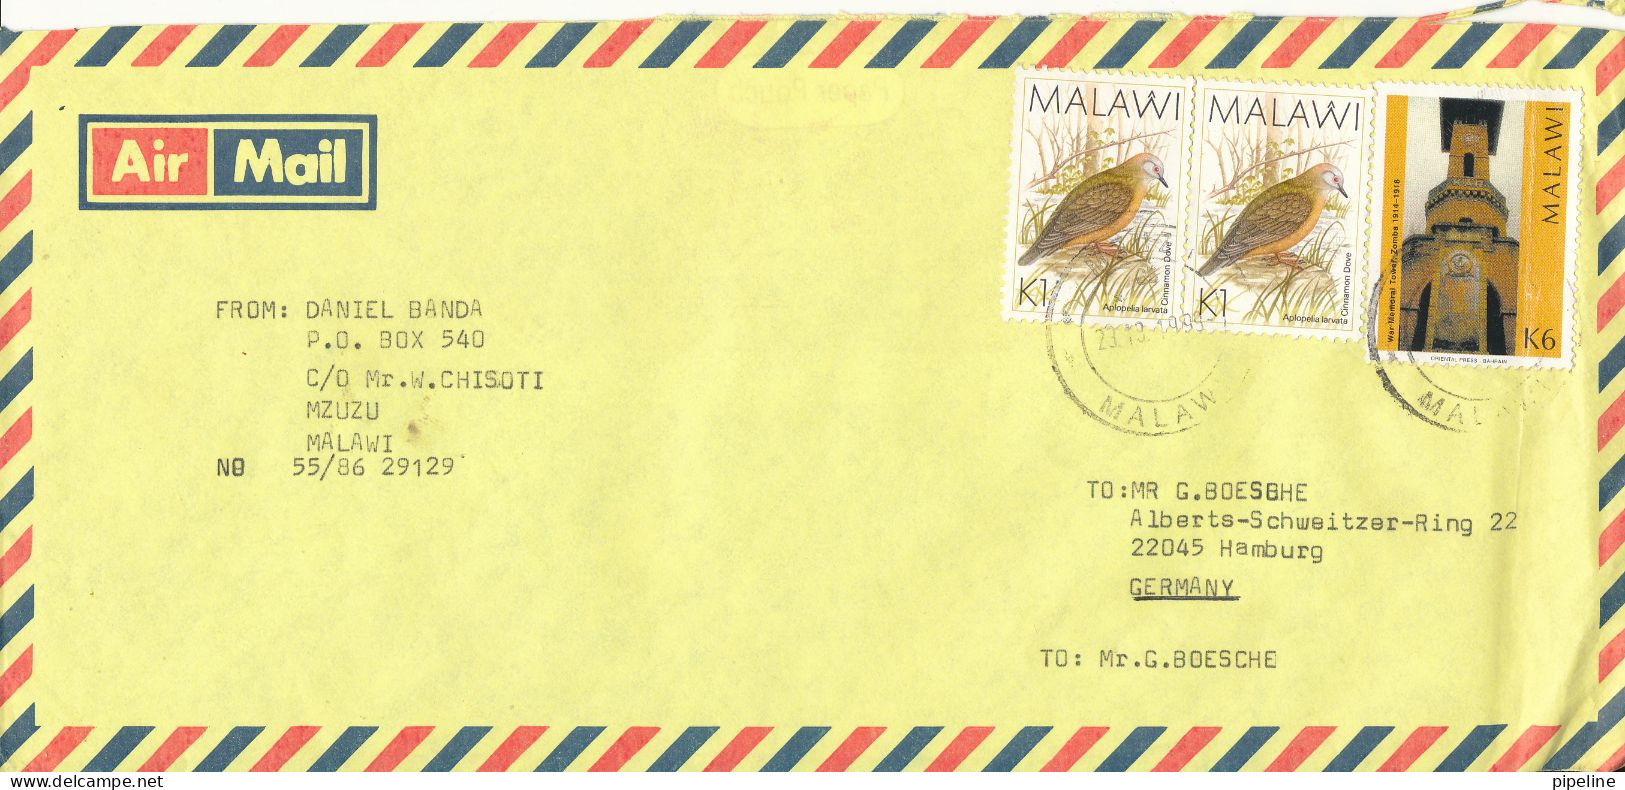 Malawi Air Mail Cover Sent To Germany 23-10-1999 BIRD Stamps - Malawi (1964-...)